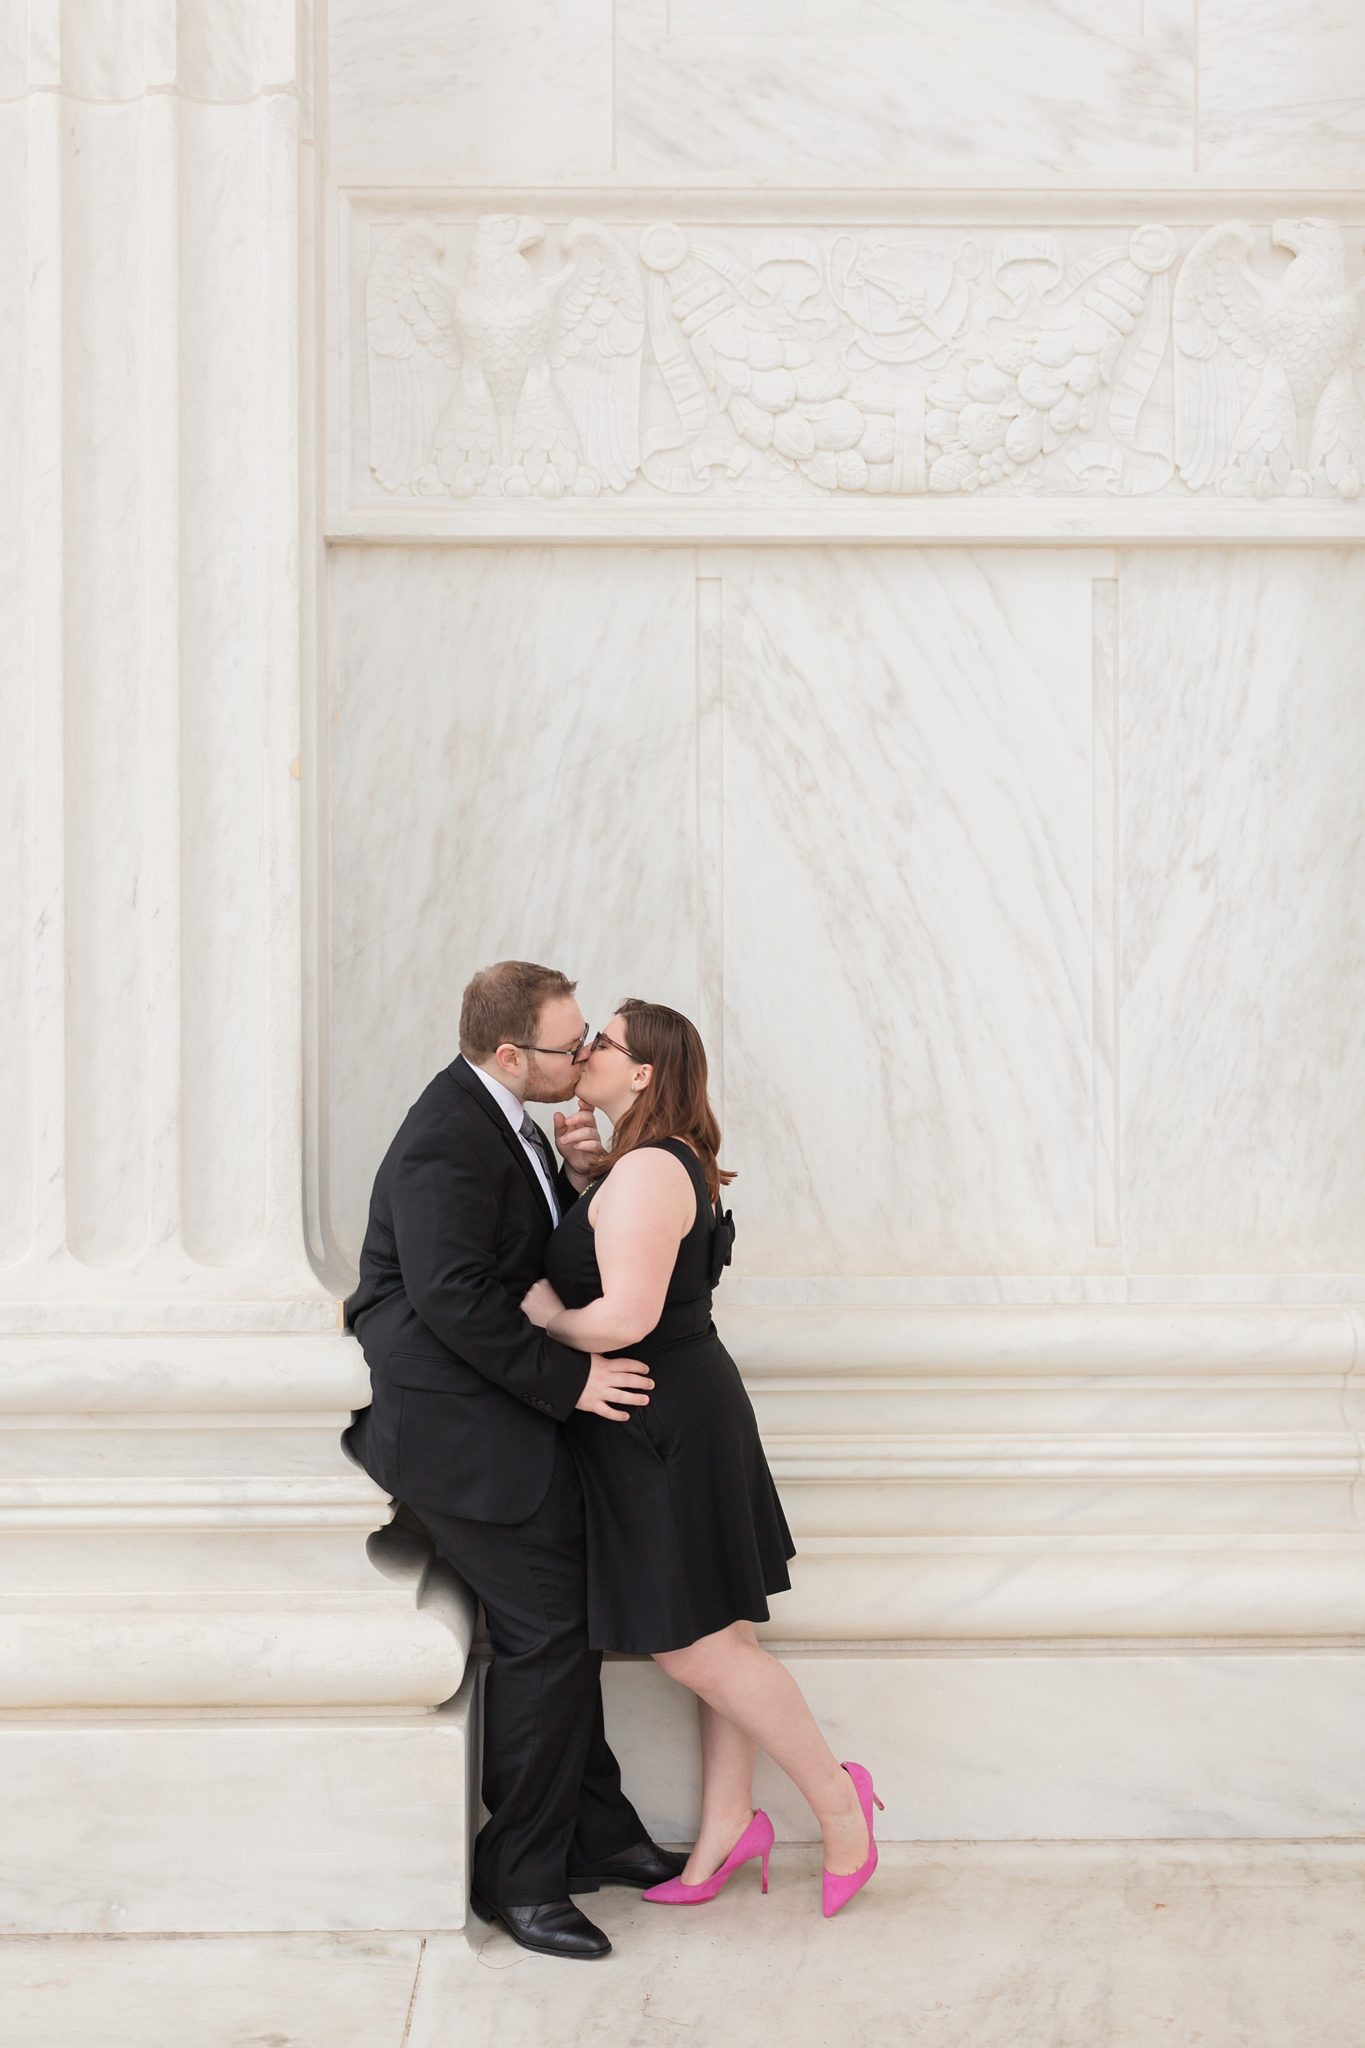 The iconic Supreme Court provides a stunning backdrop for spring engagement photos captured by Washington, DC wedding photographer, Alicia Lacey.